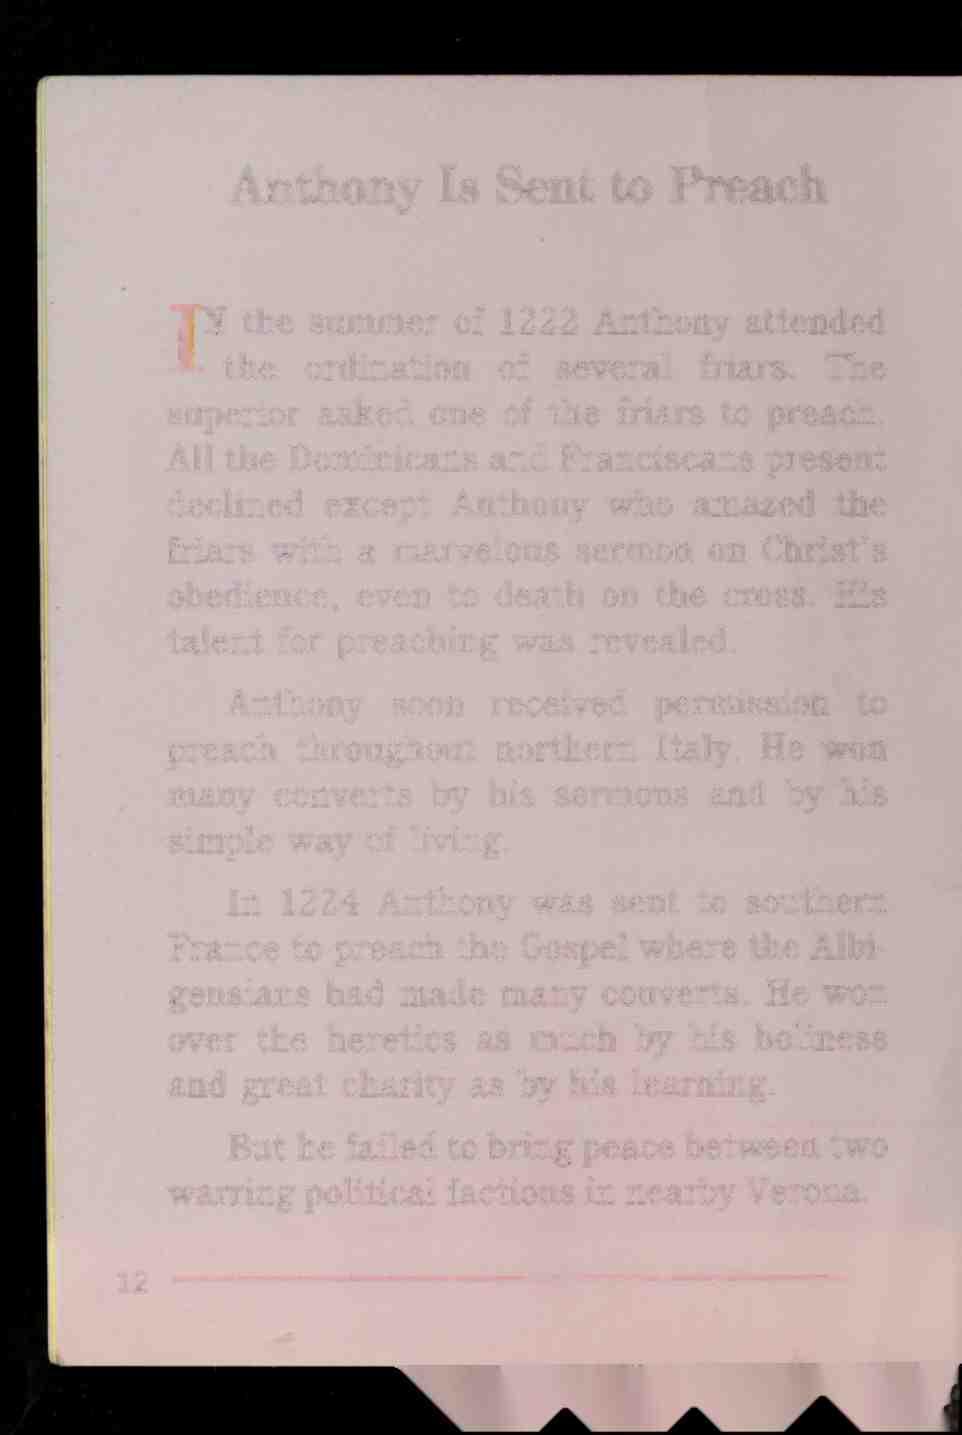 Anthony Is Sent to Preach IN the summer of 1222 Anthony attended the ordination of several friars. The superior asked one of the friars to preach.